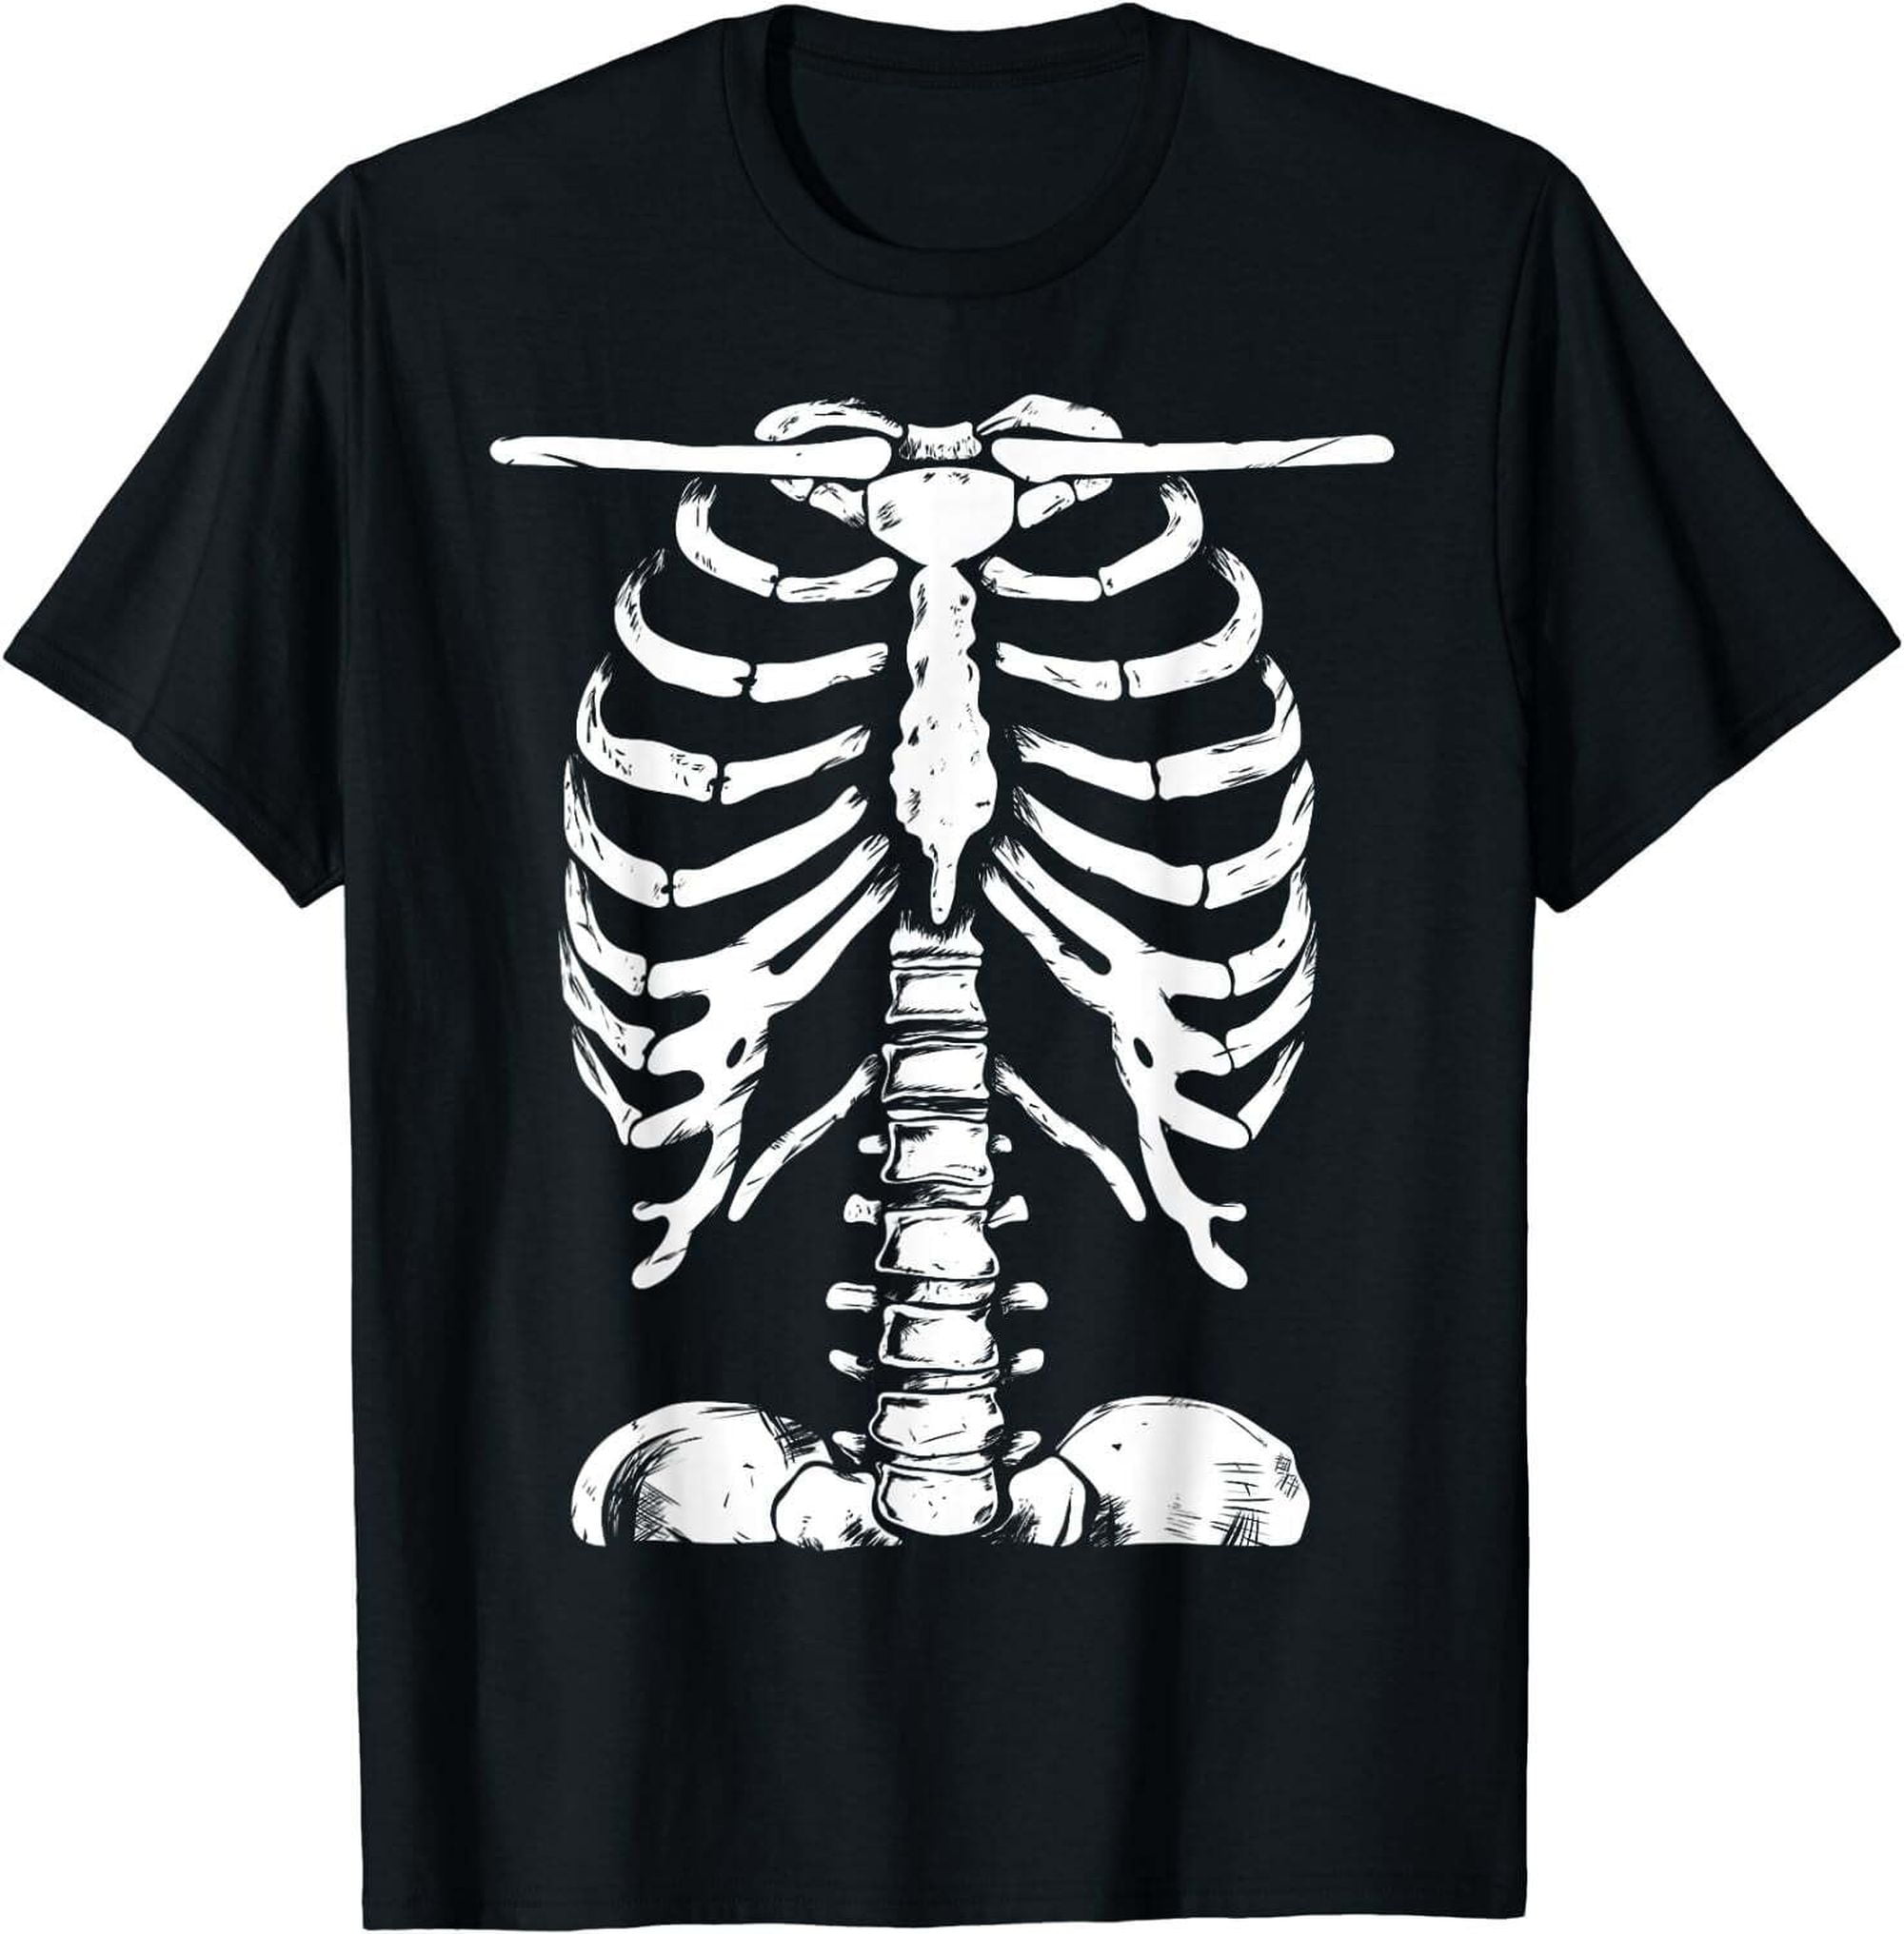 Skeleton Rib Cage Halloween Costume T-Shirt for Men and Women - Spooky ...